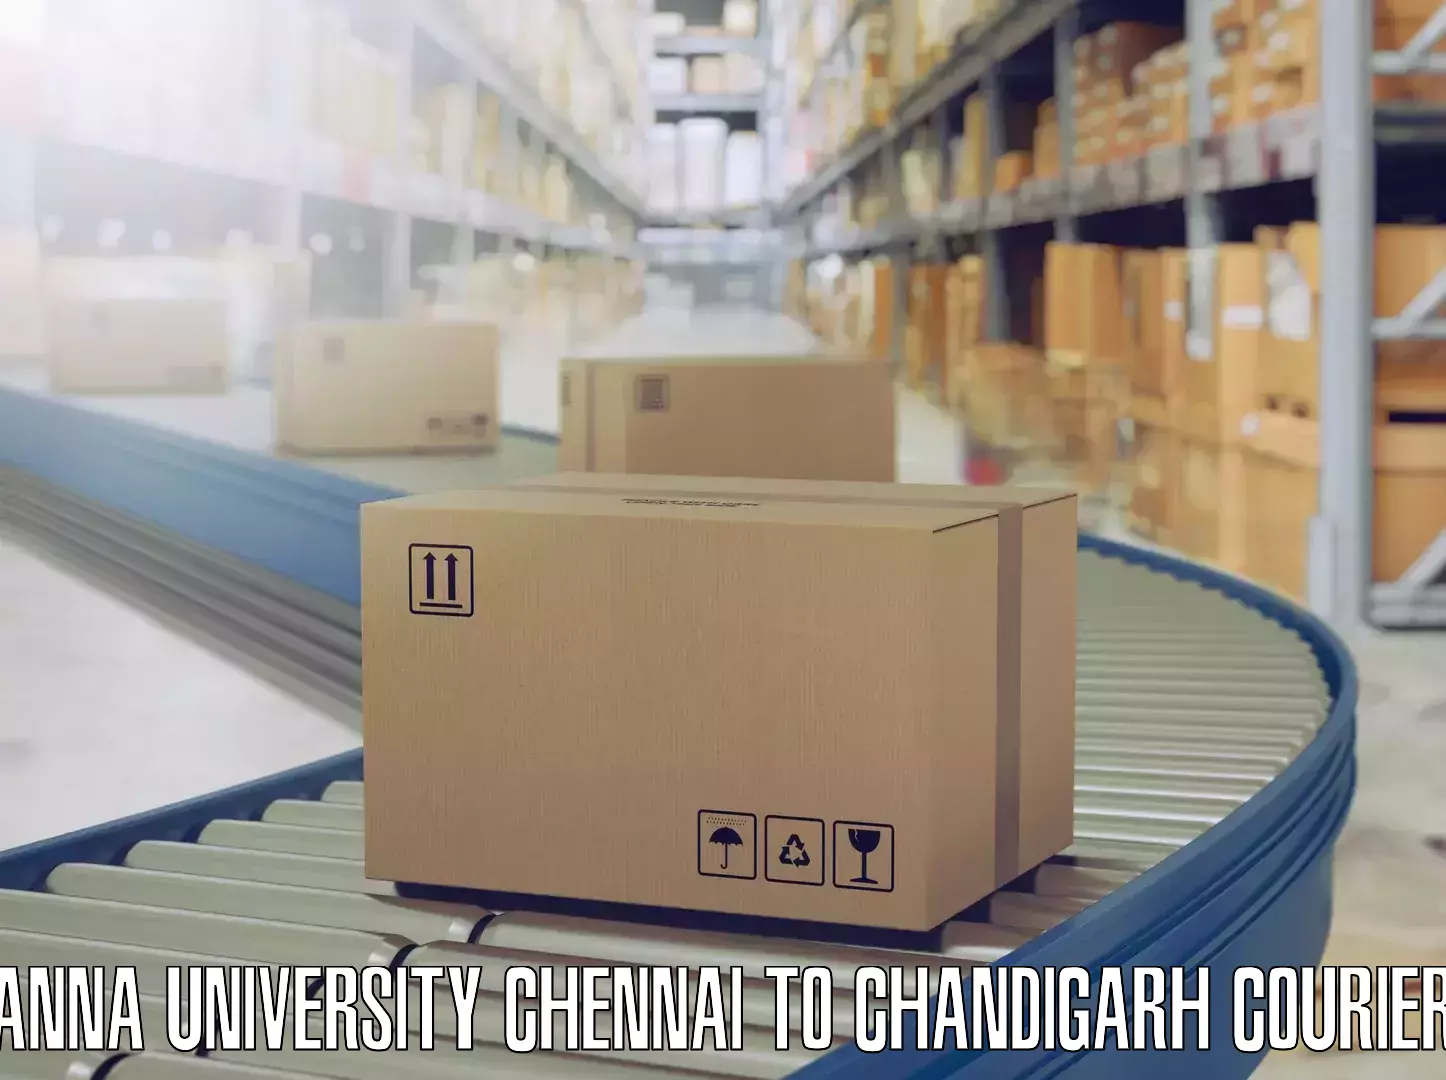 Professional movers and packers in Anna University Chennai to Chandigarh